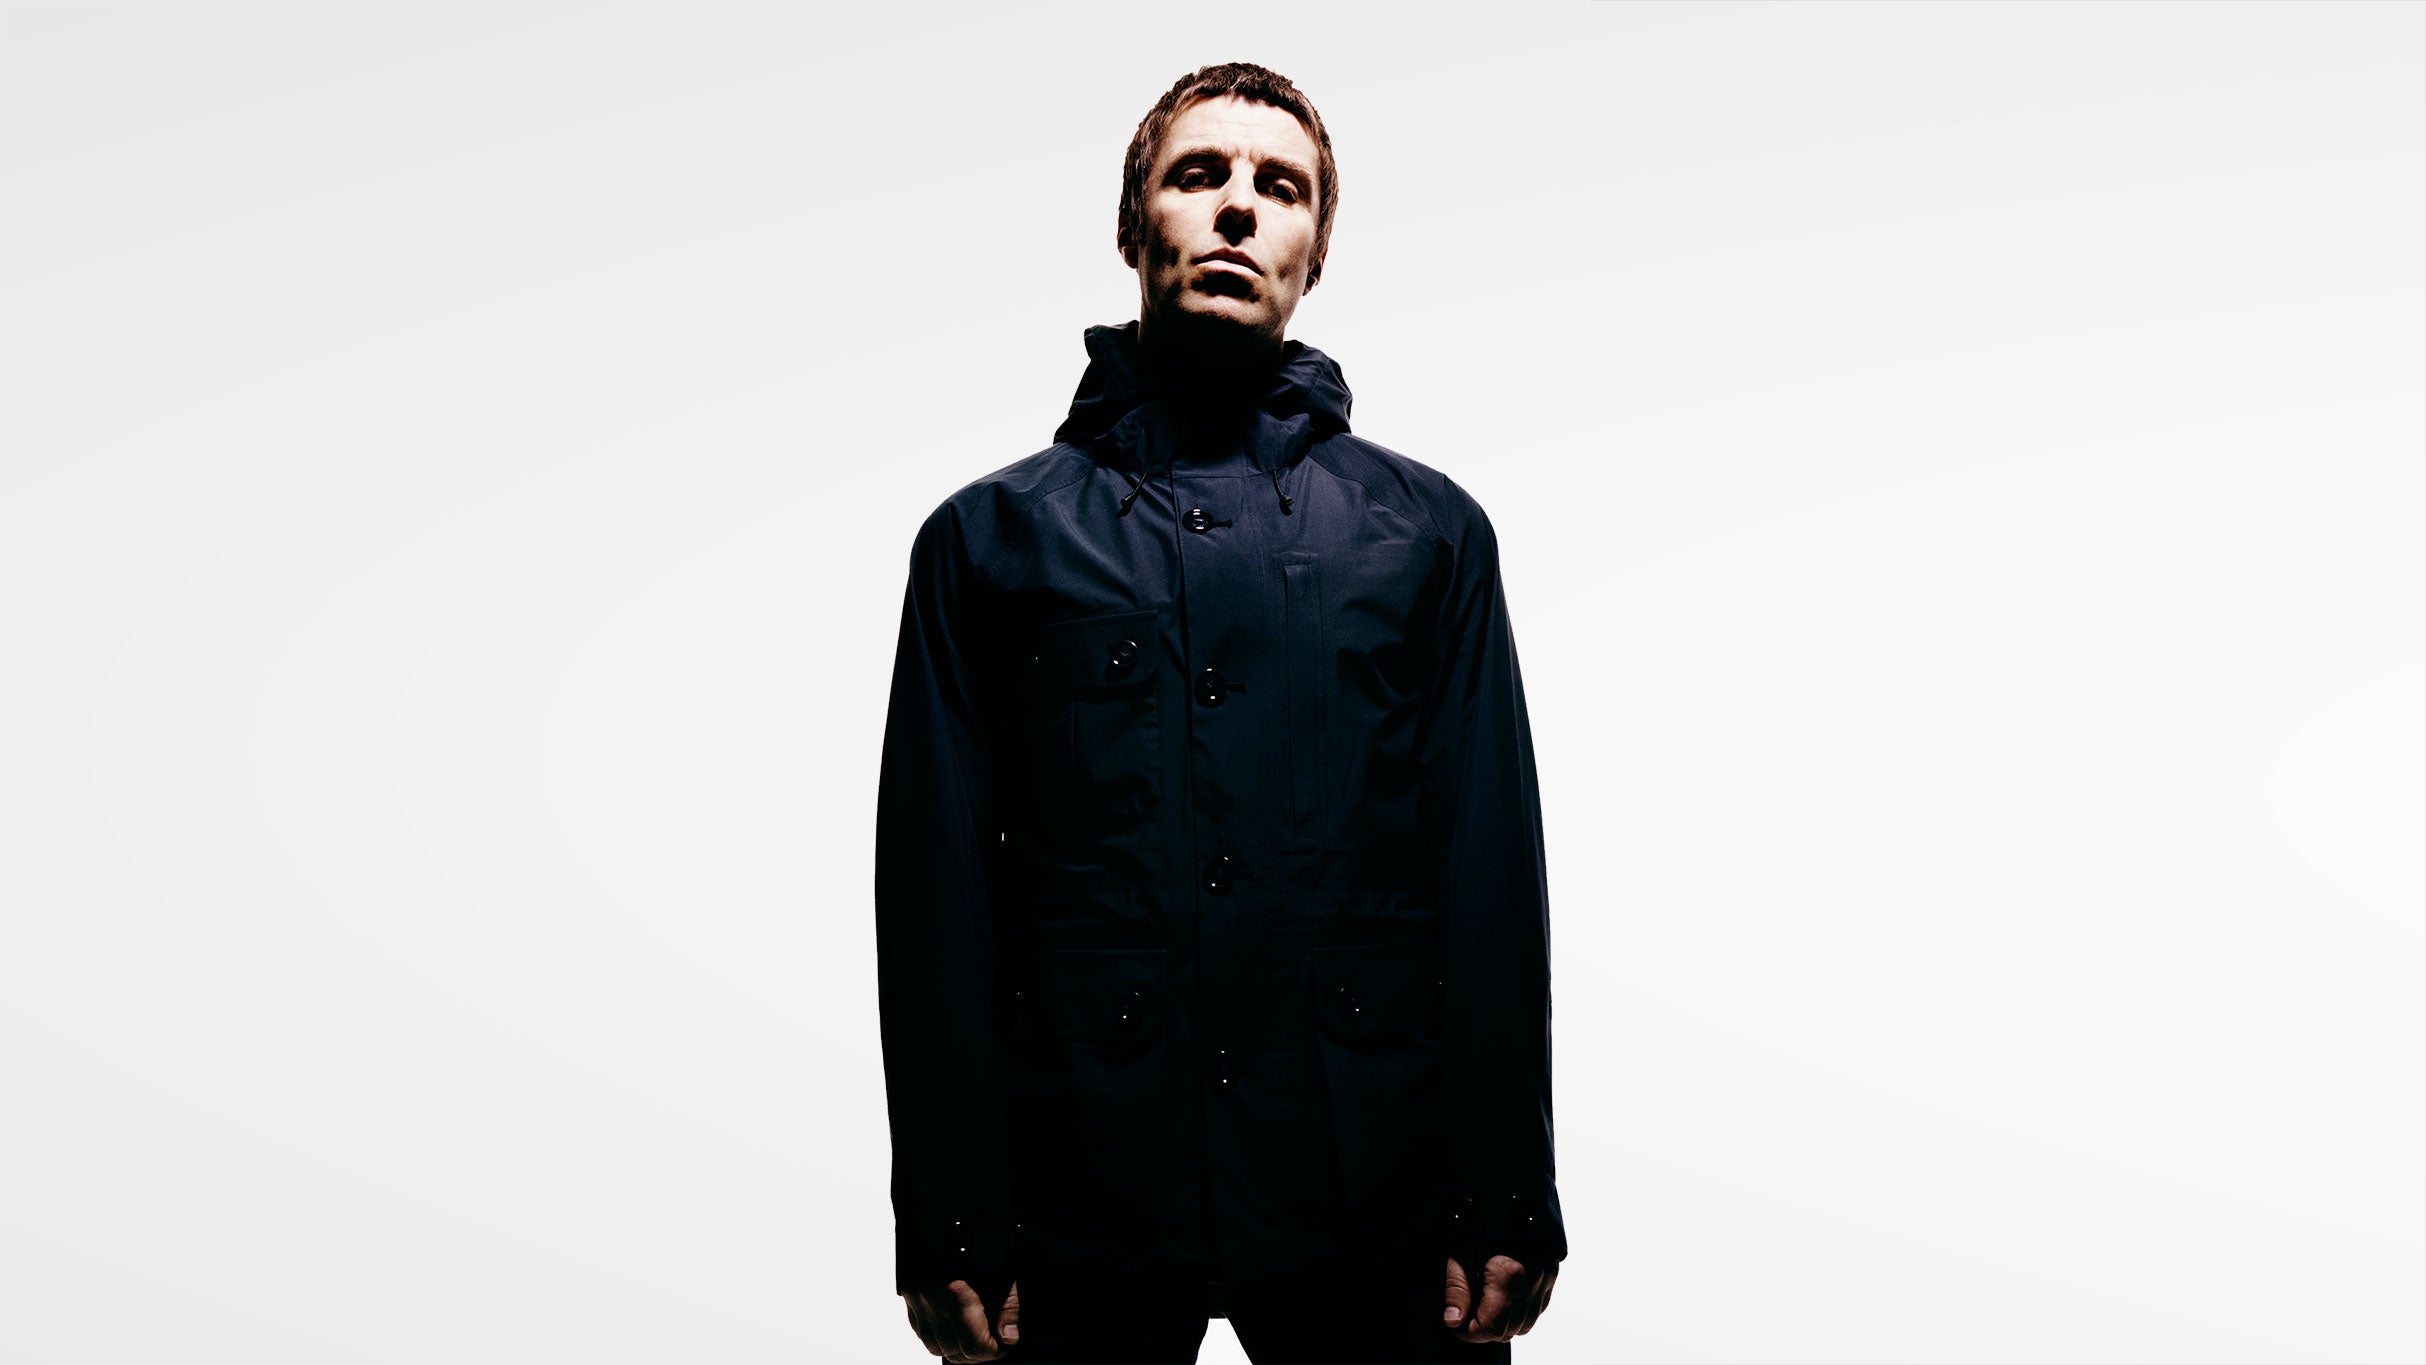 members only presale passcode for Liam Gallagher John Squire tickets in Glasgow